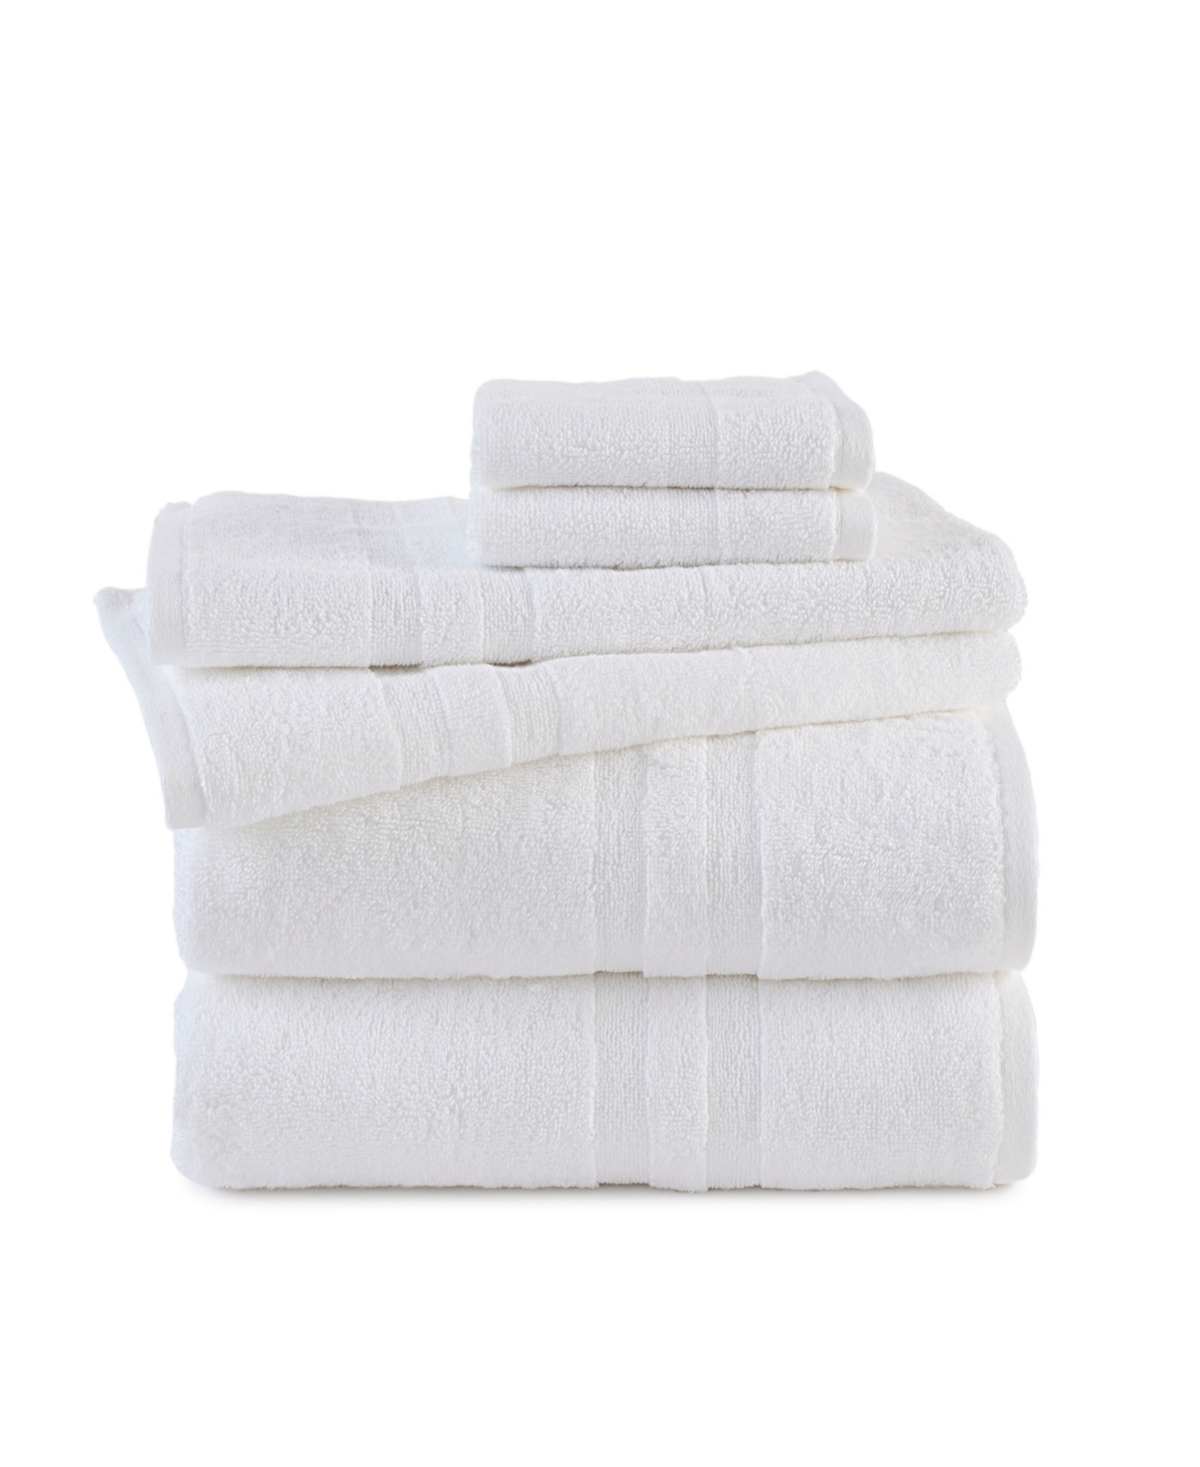 Martex Purity 6-pc. Towel Set In Optical White